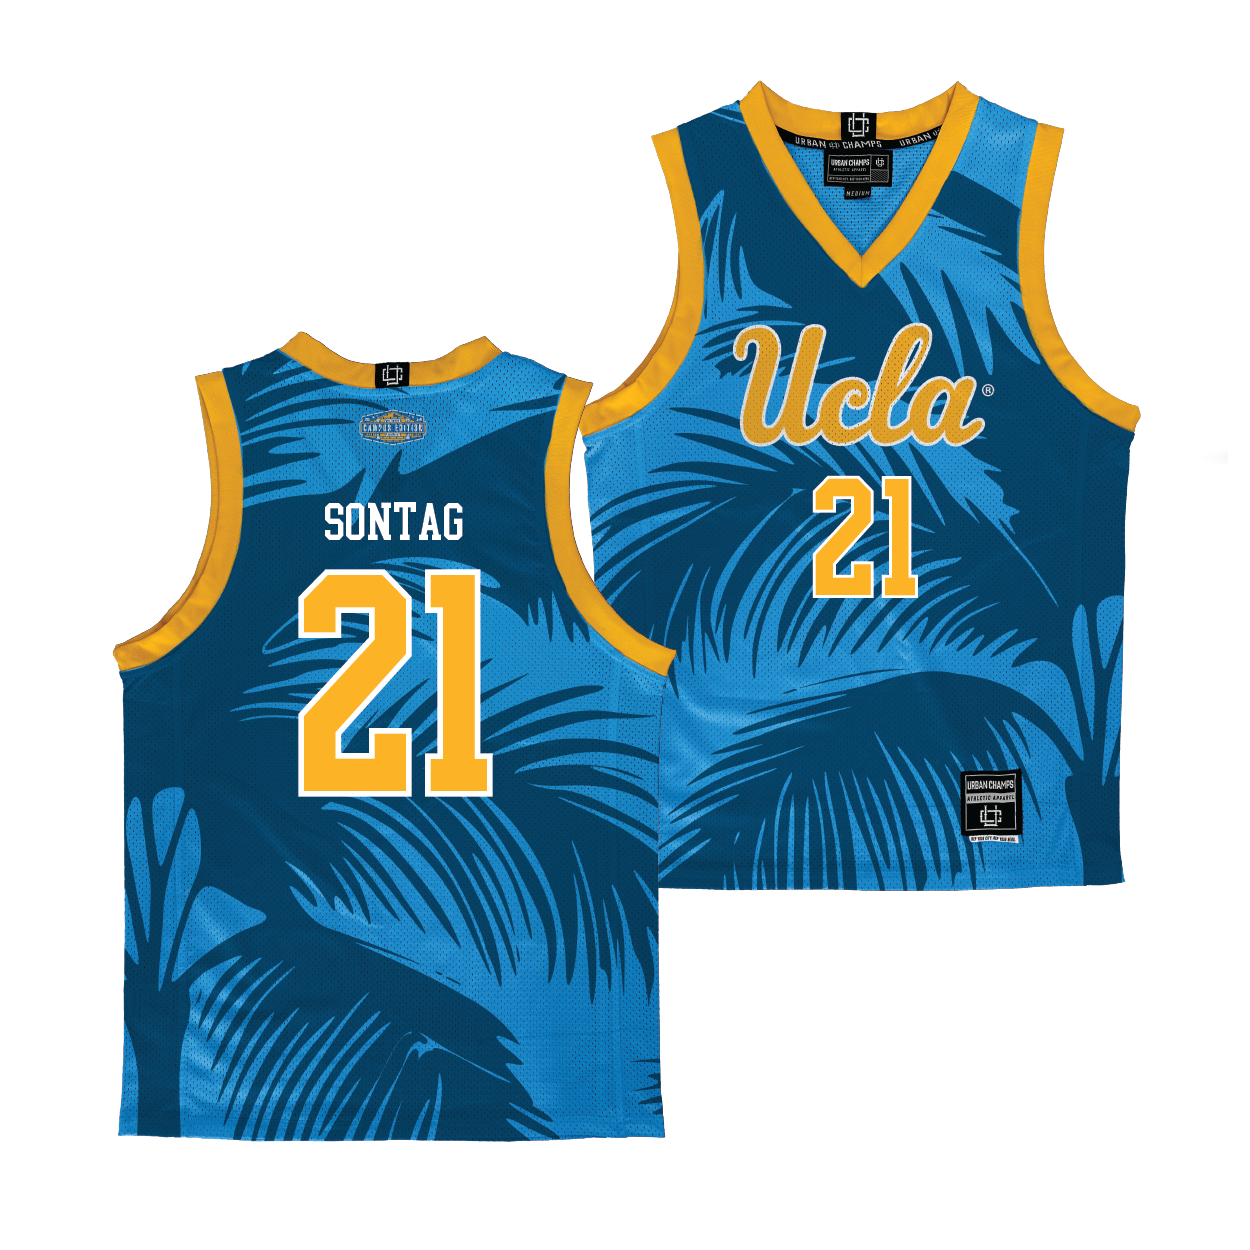 UCLA Campus Edition NIL Jersey - Lina Sontag